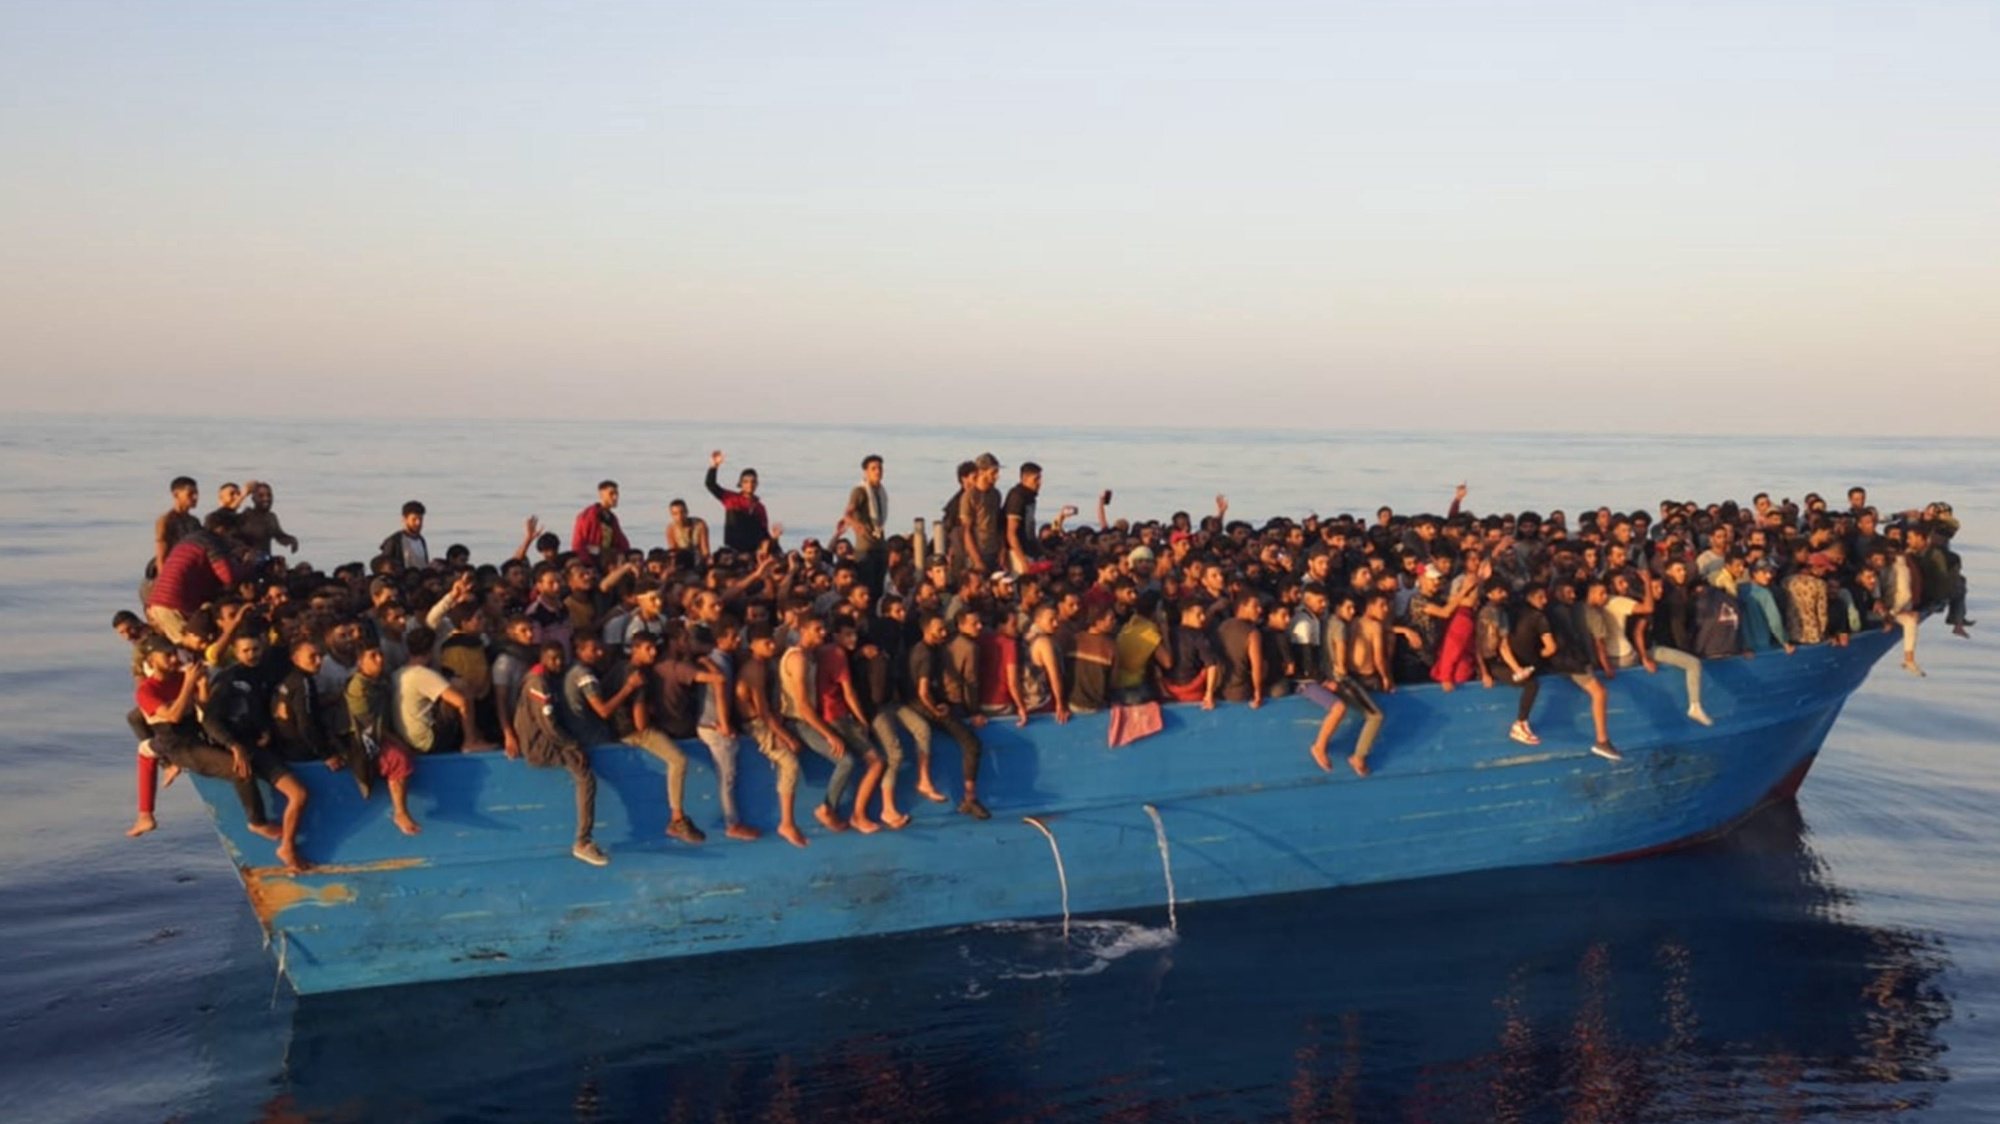 epa09433267 The approximately 400 migrants on a boat off the island of Lampedusa, Italy, 28 August 2021. The migrants were transferred to patrol boats and boats of the Capitaneria di Porto (Harbor Master&#039;s Office) and brought to the port of Lampedusa.  EPA/CONCETTA RIZZO